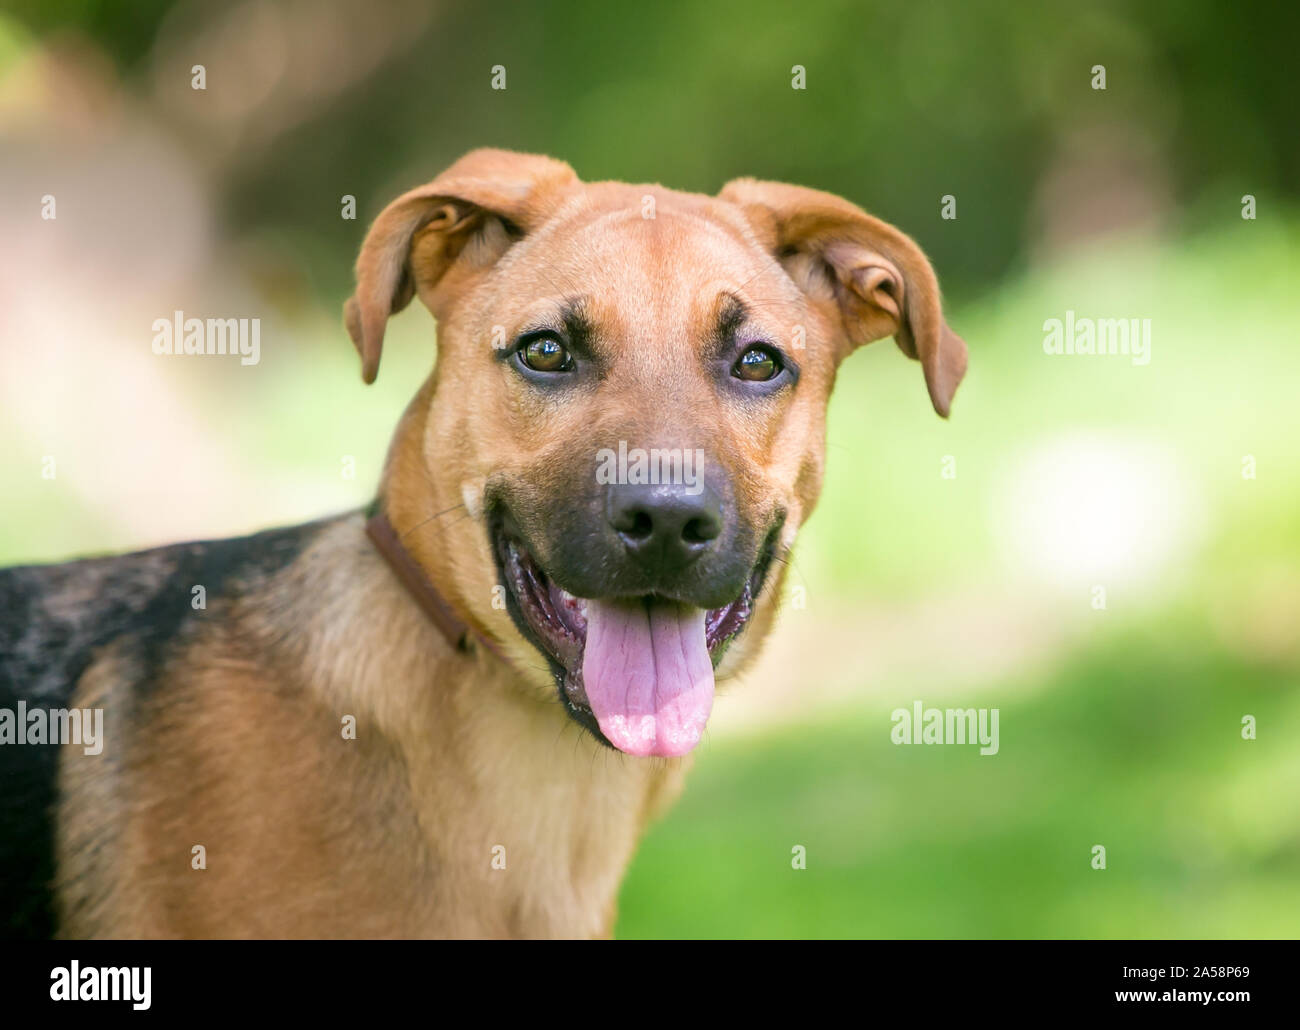 A German Shepherd Dog puppy with floppy ears outdoors Stock Photo